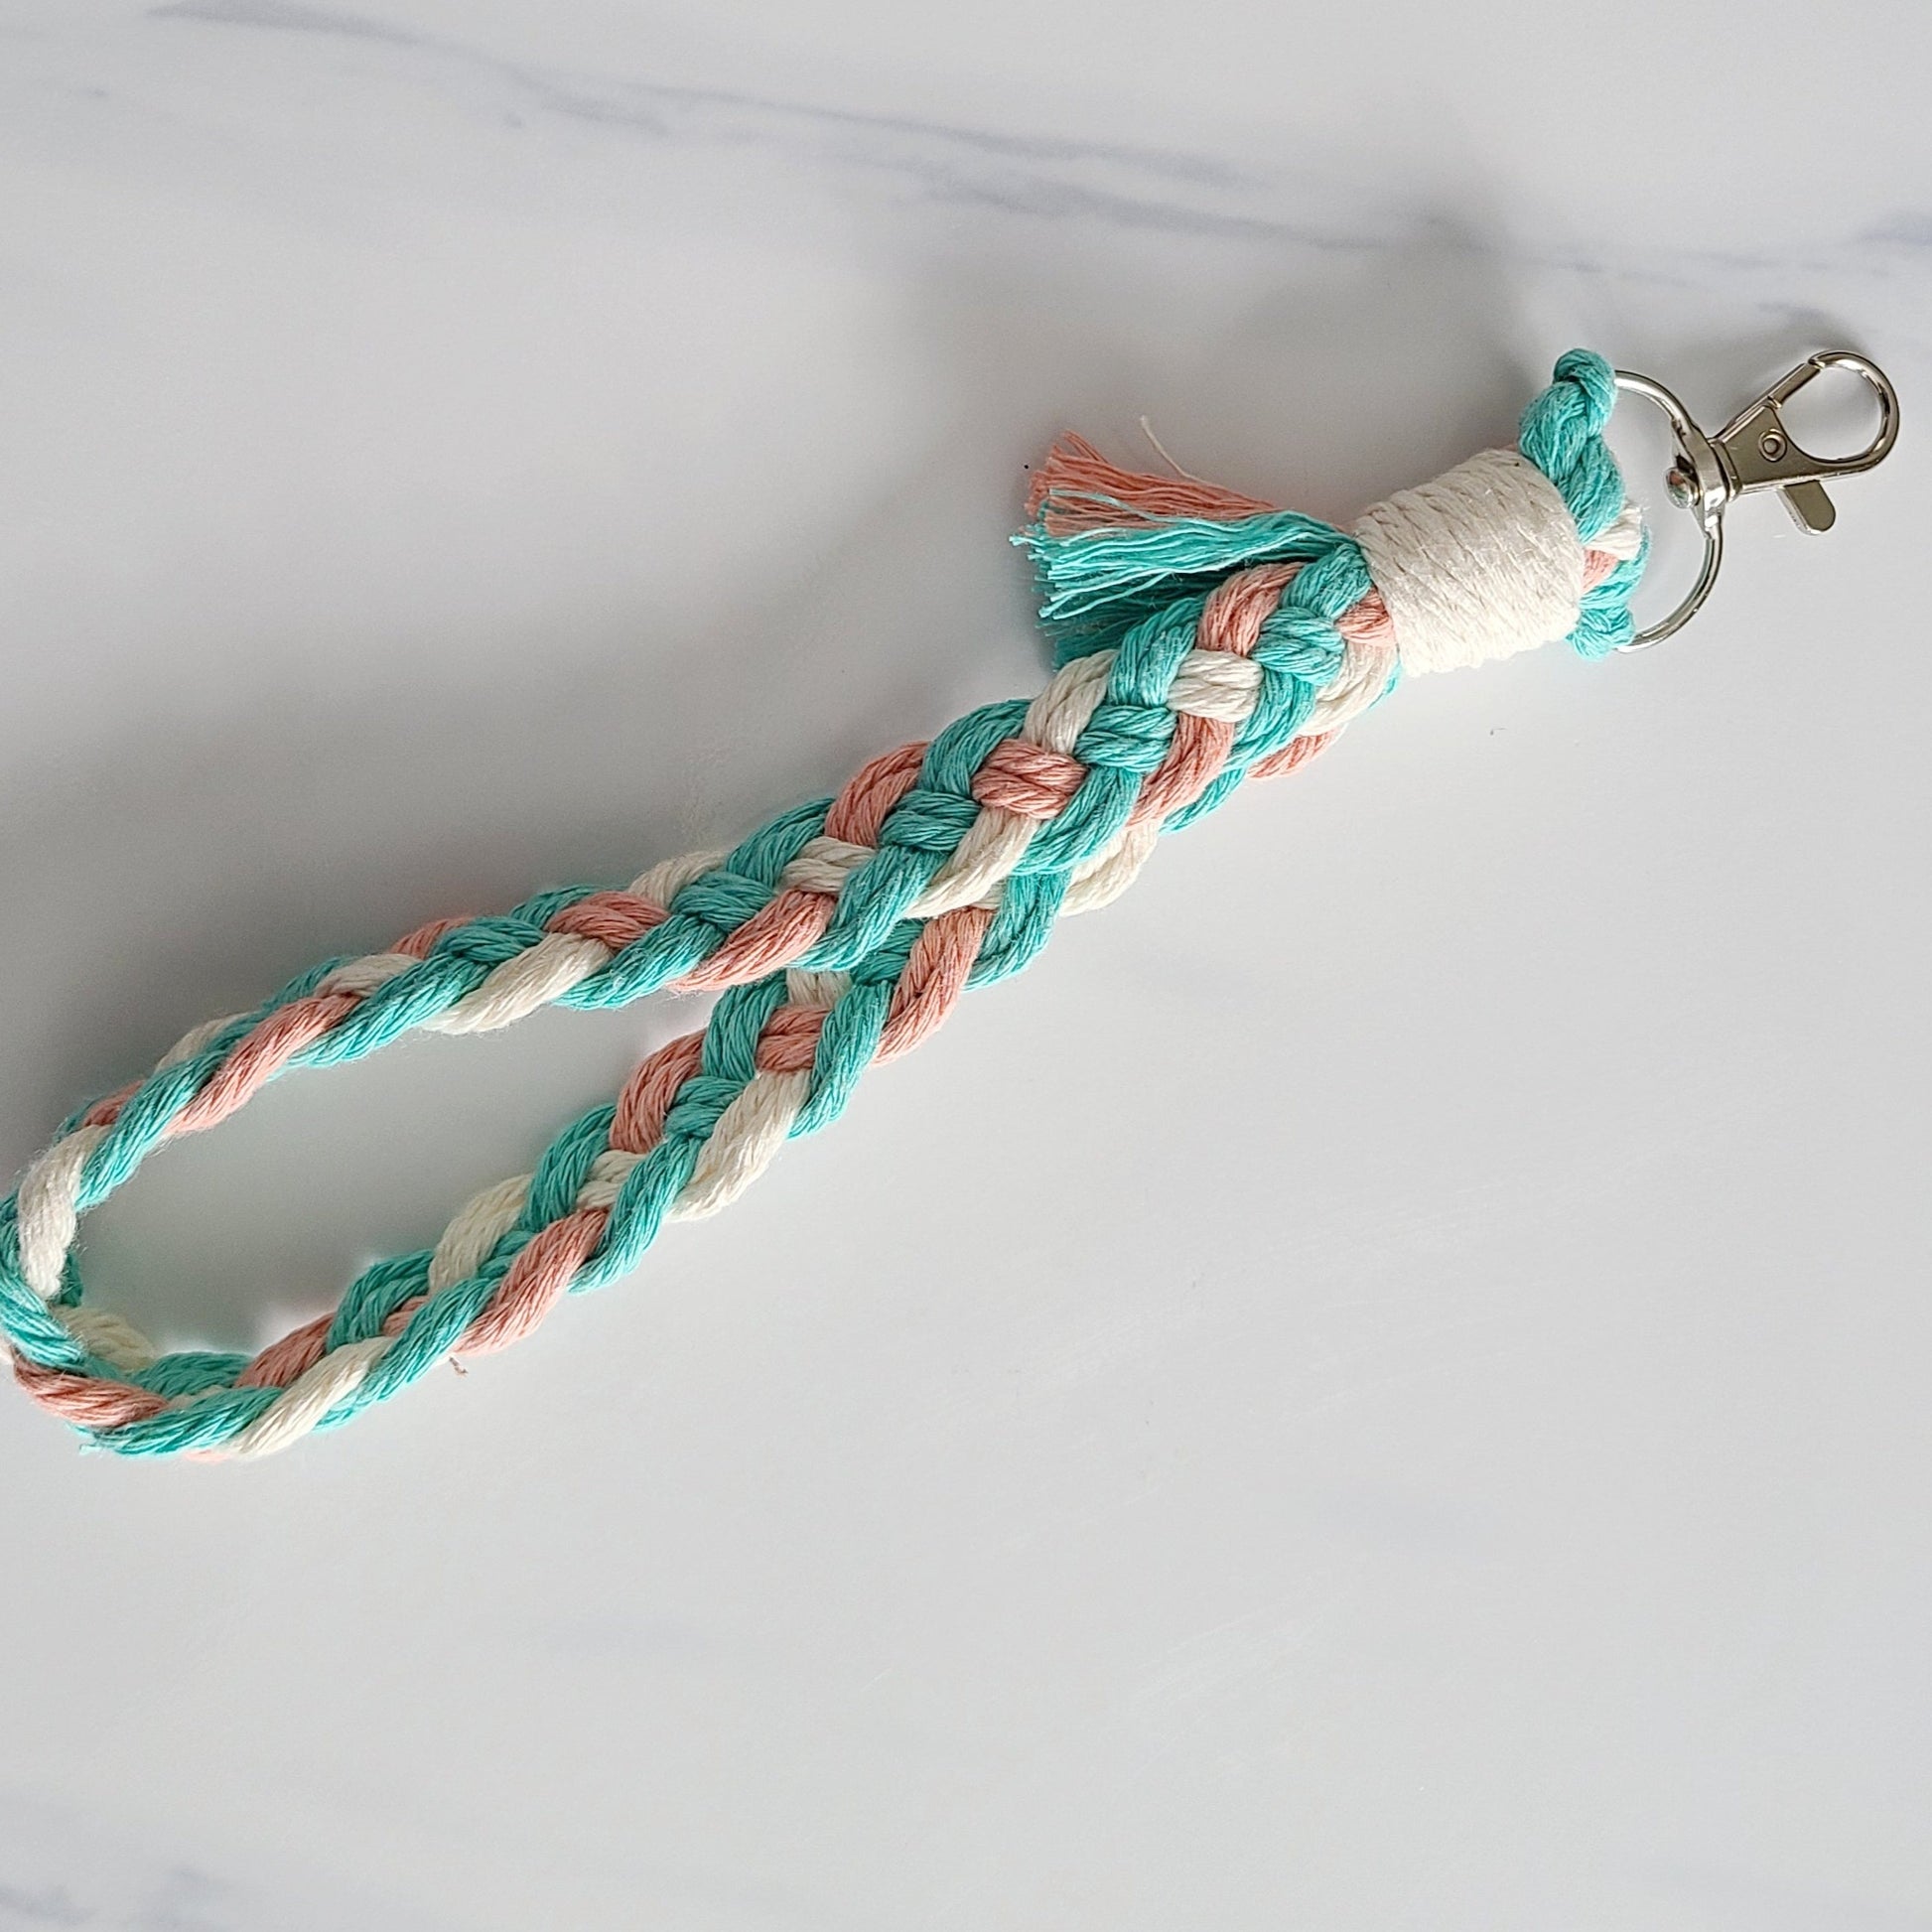 Braided Macrame Wristlet made using the colors from the transgender pride flag